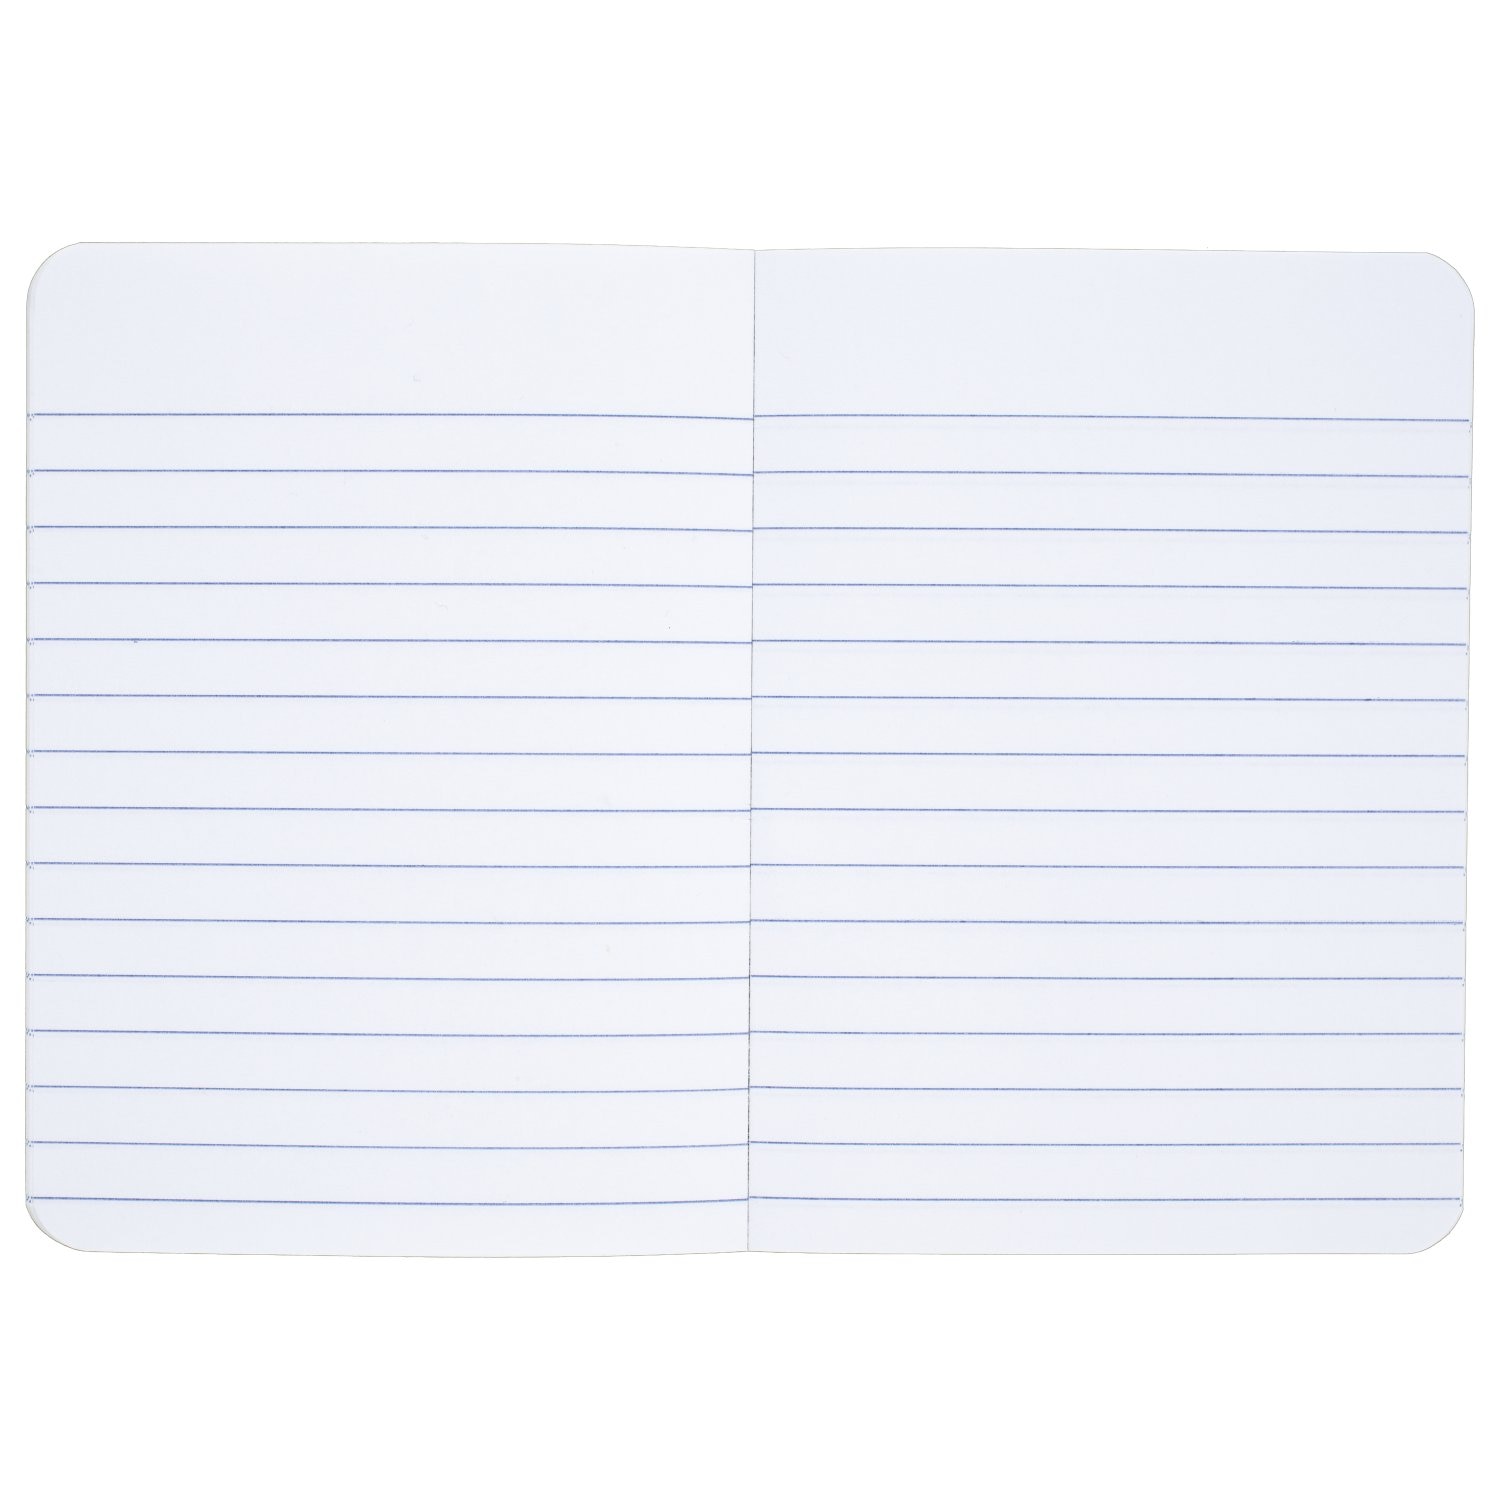 Mead Square Deal Memo Book Narrow Ruled 80 Sheets Black